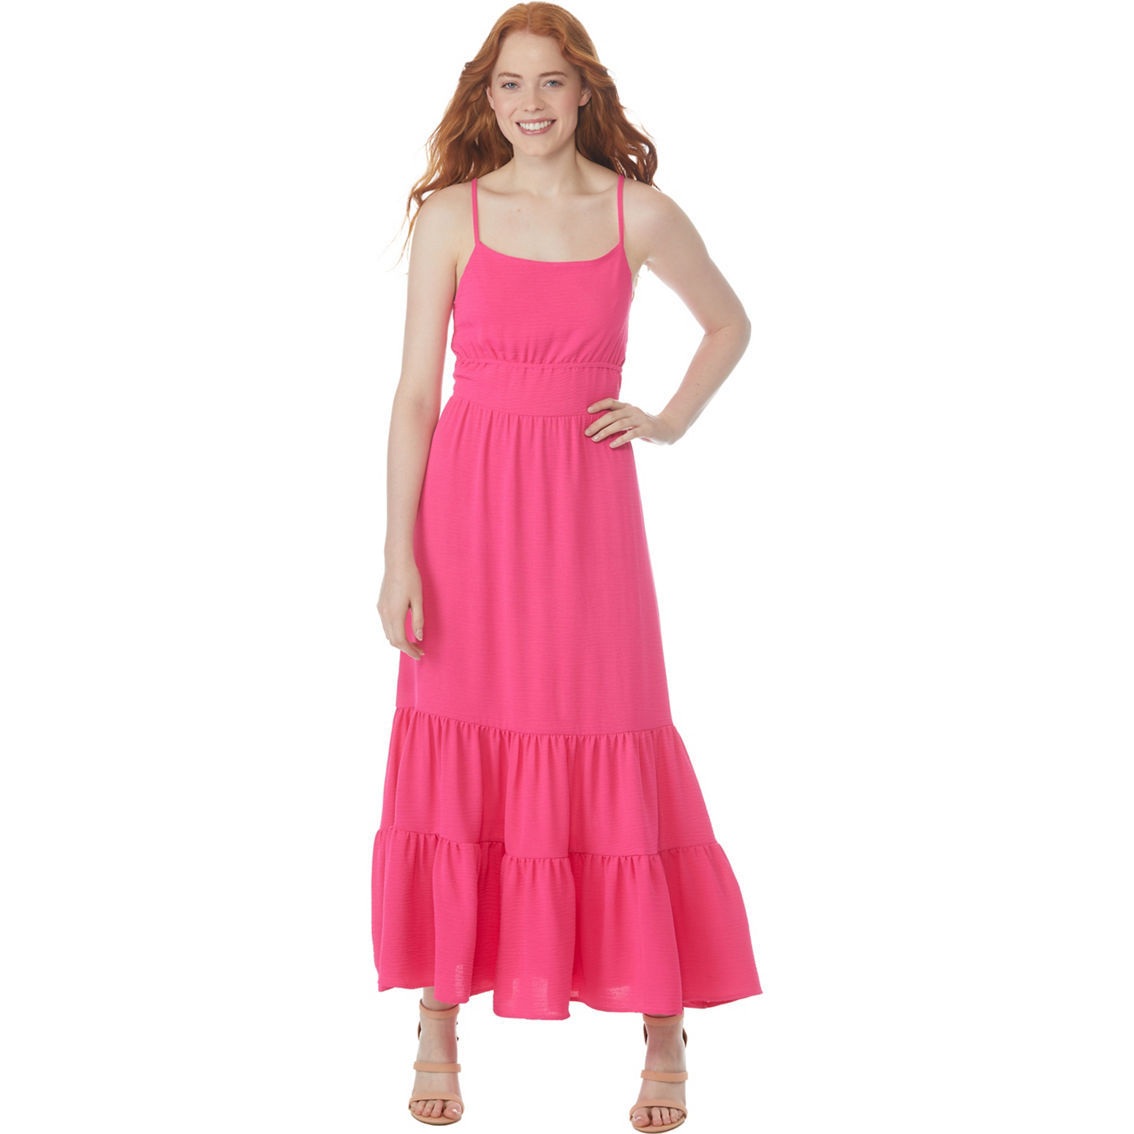 Ever After Juniors Tie Back Dress - Image 1 of 3